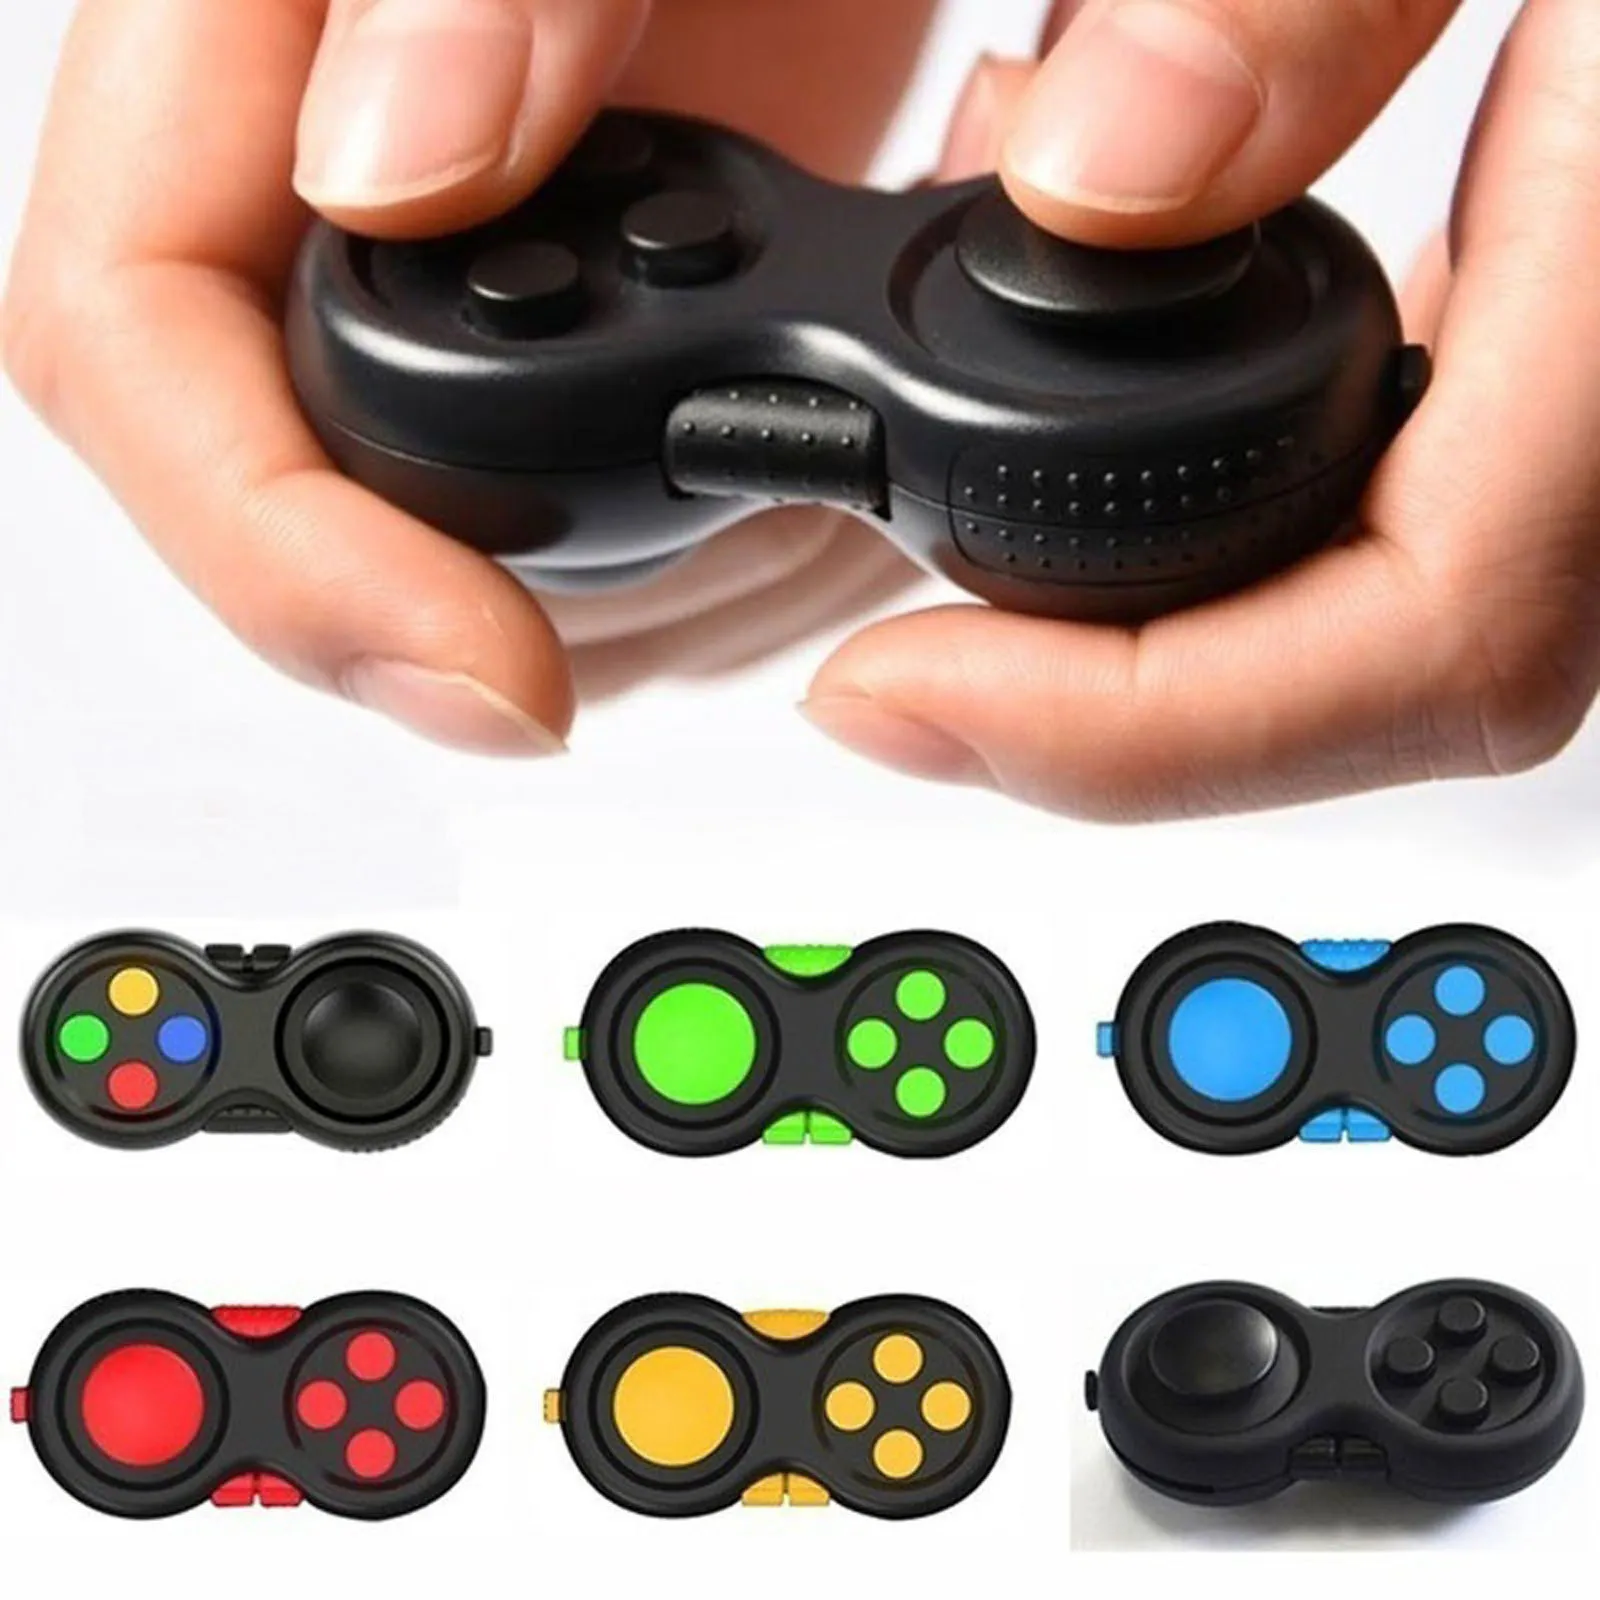 

Figet Toys Stress For Adult Decompression Gamepad Is Used To Relieve The Stress And Anxiety Of Children And Adults juguetes 2021